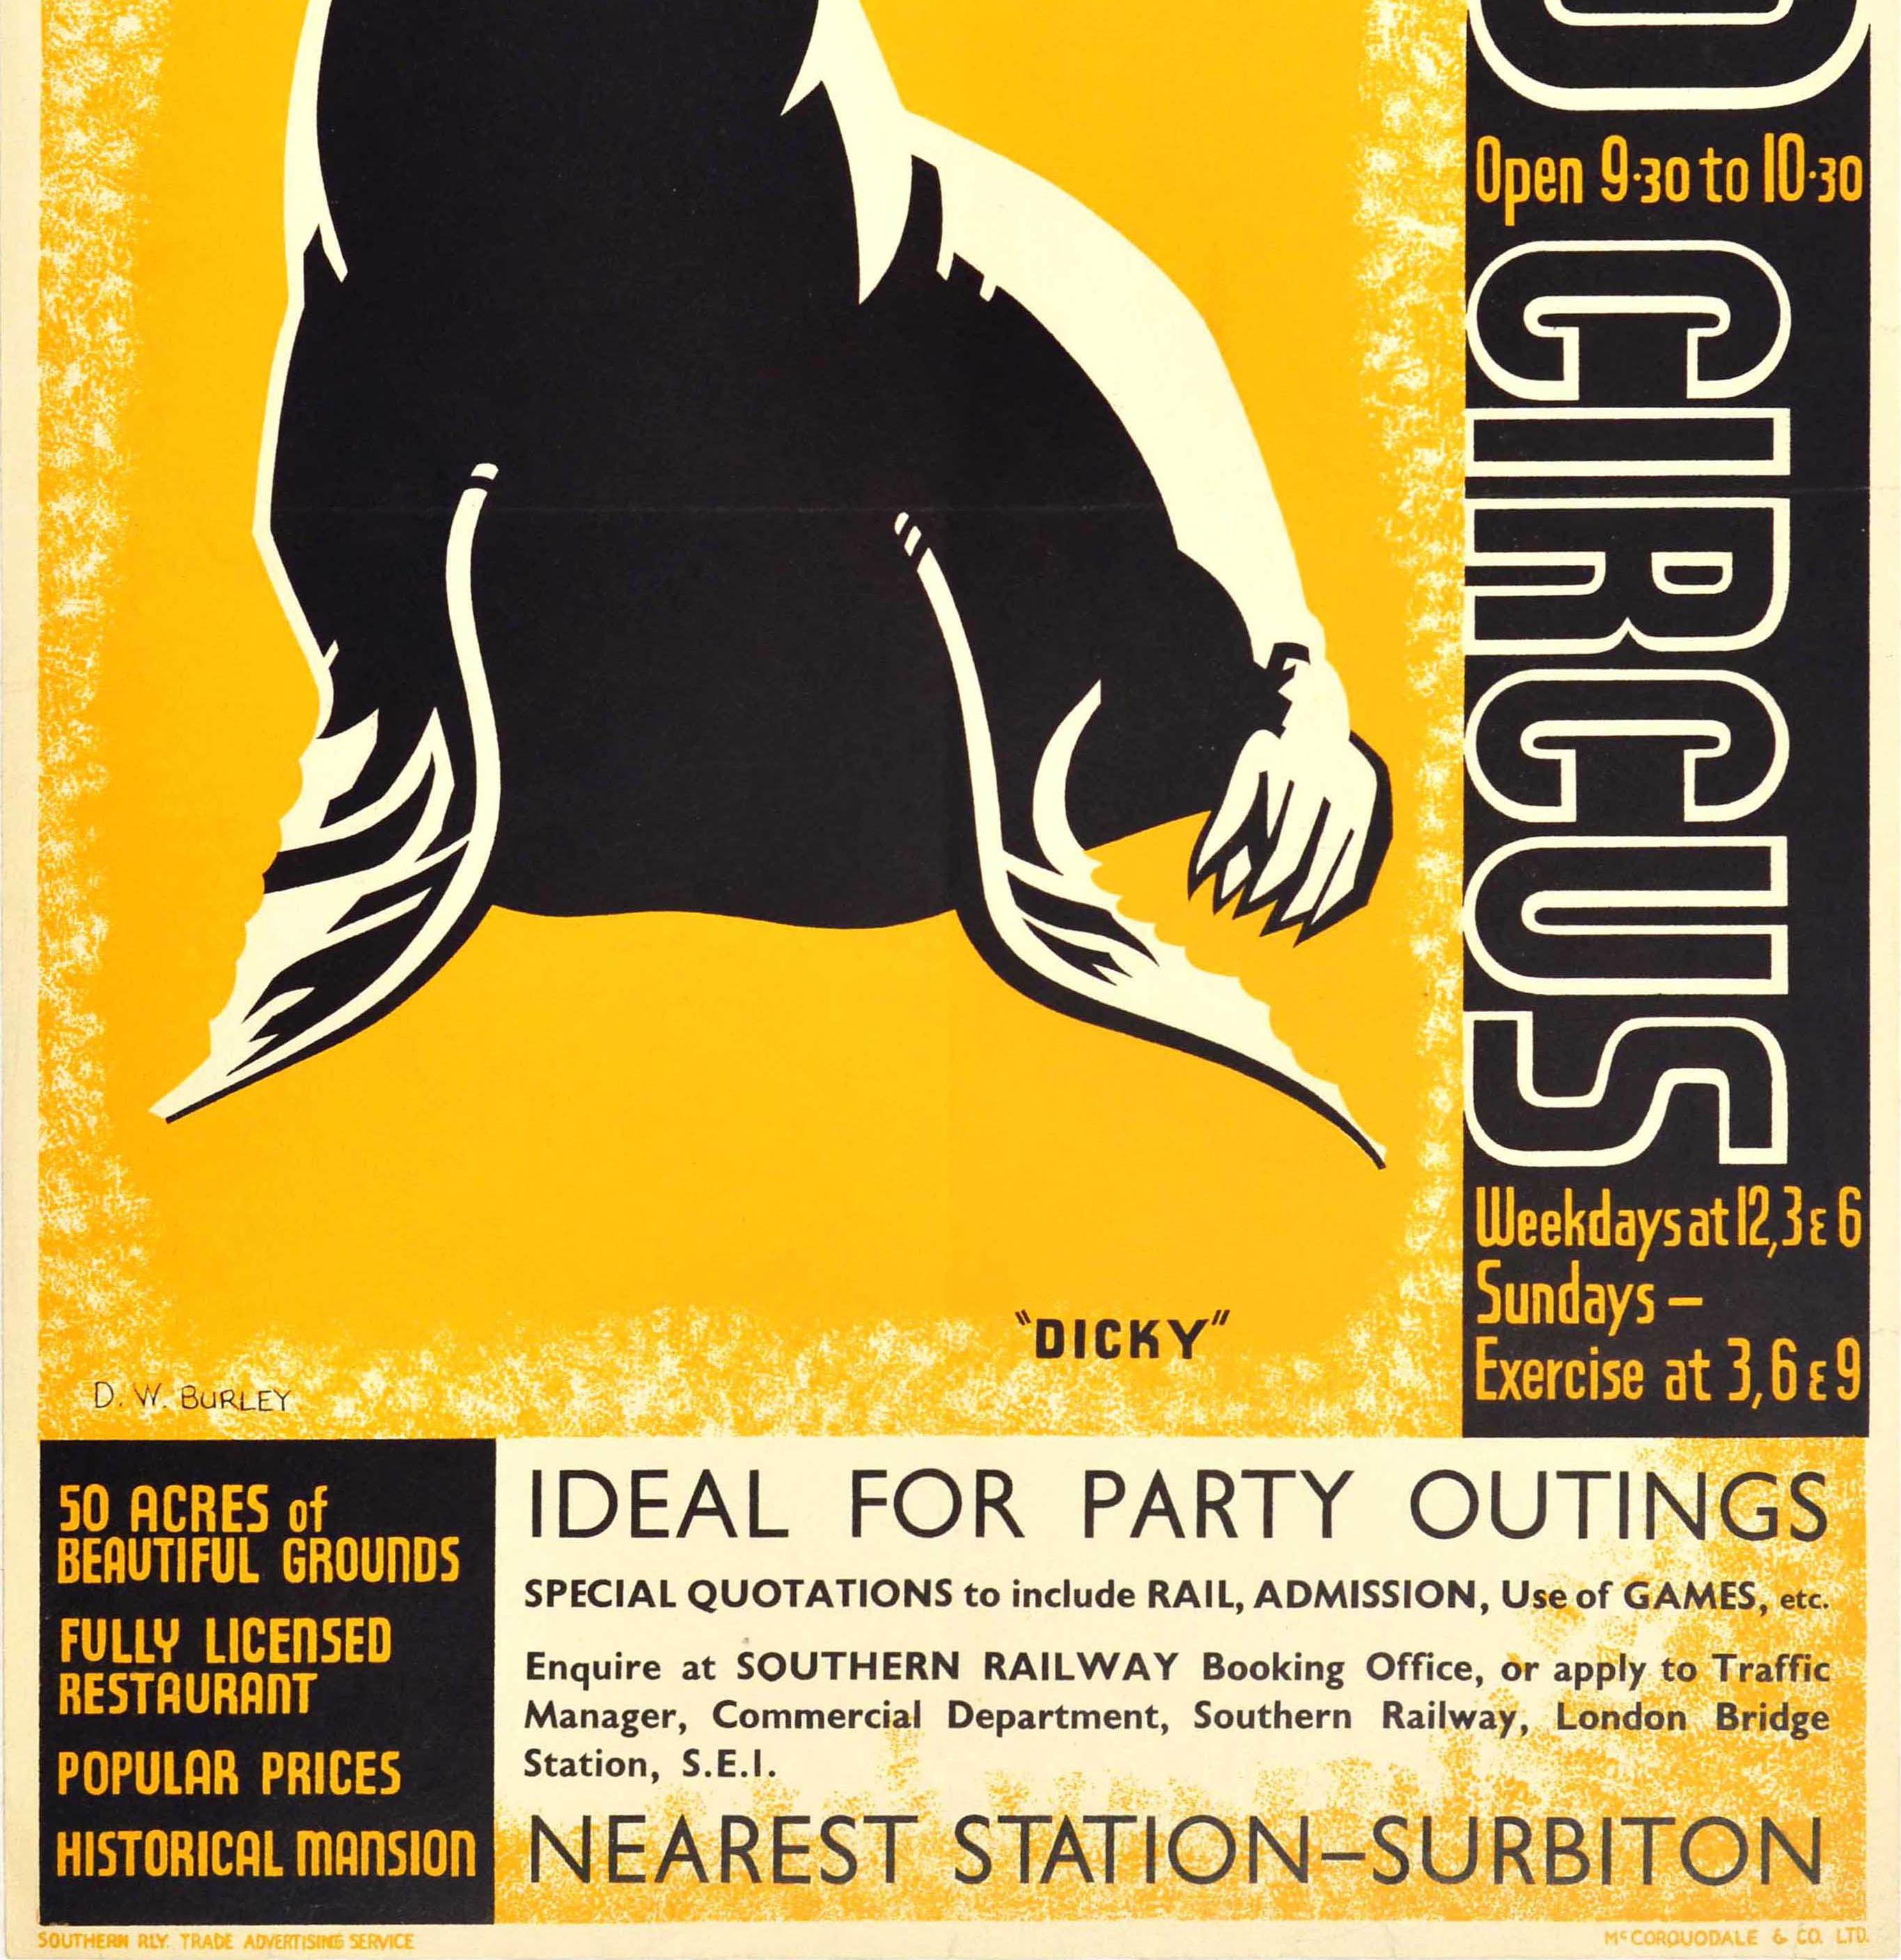 Original vintage travel poster for Chessington Zoo Circus by Southern Railway - 50 acres of beautiful grounds Fully licensed restaurant Popular prices Historical mansion Ideal for party outings Nearest station Surbiton. Colourful artwork by David